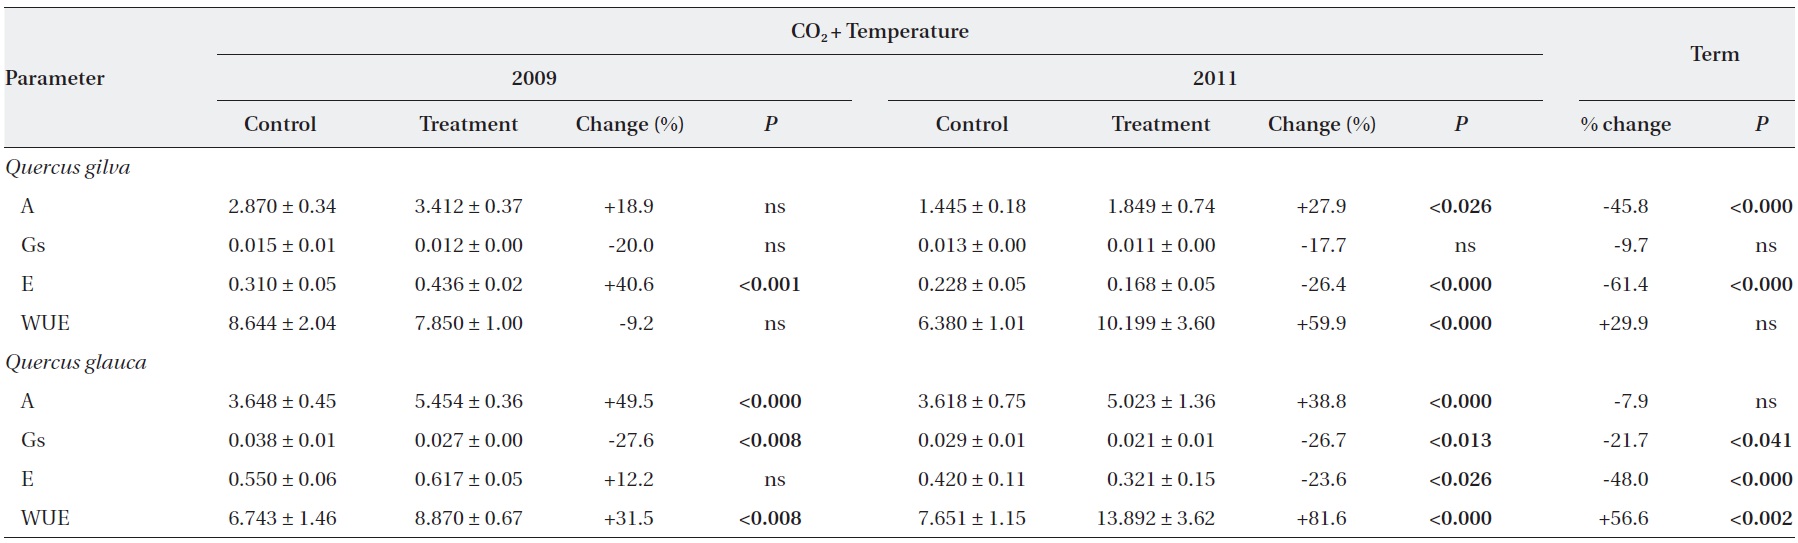 Overall impacts of elevated CO2 temperature and term of CO2 exposure on photosynthetic parameters